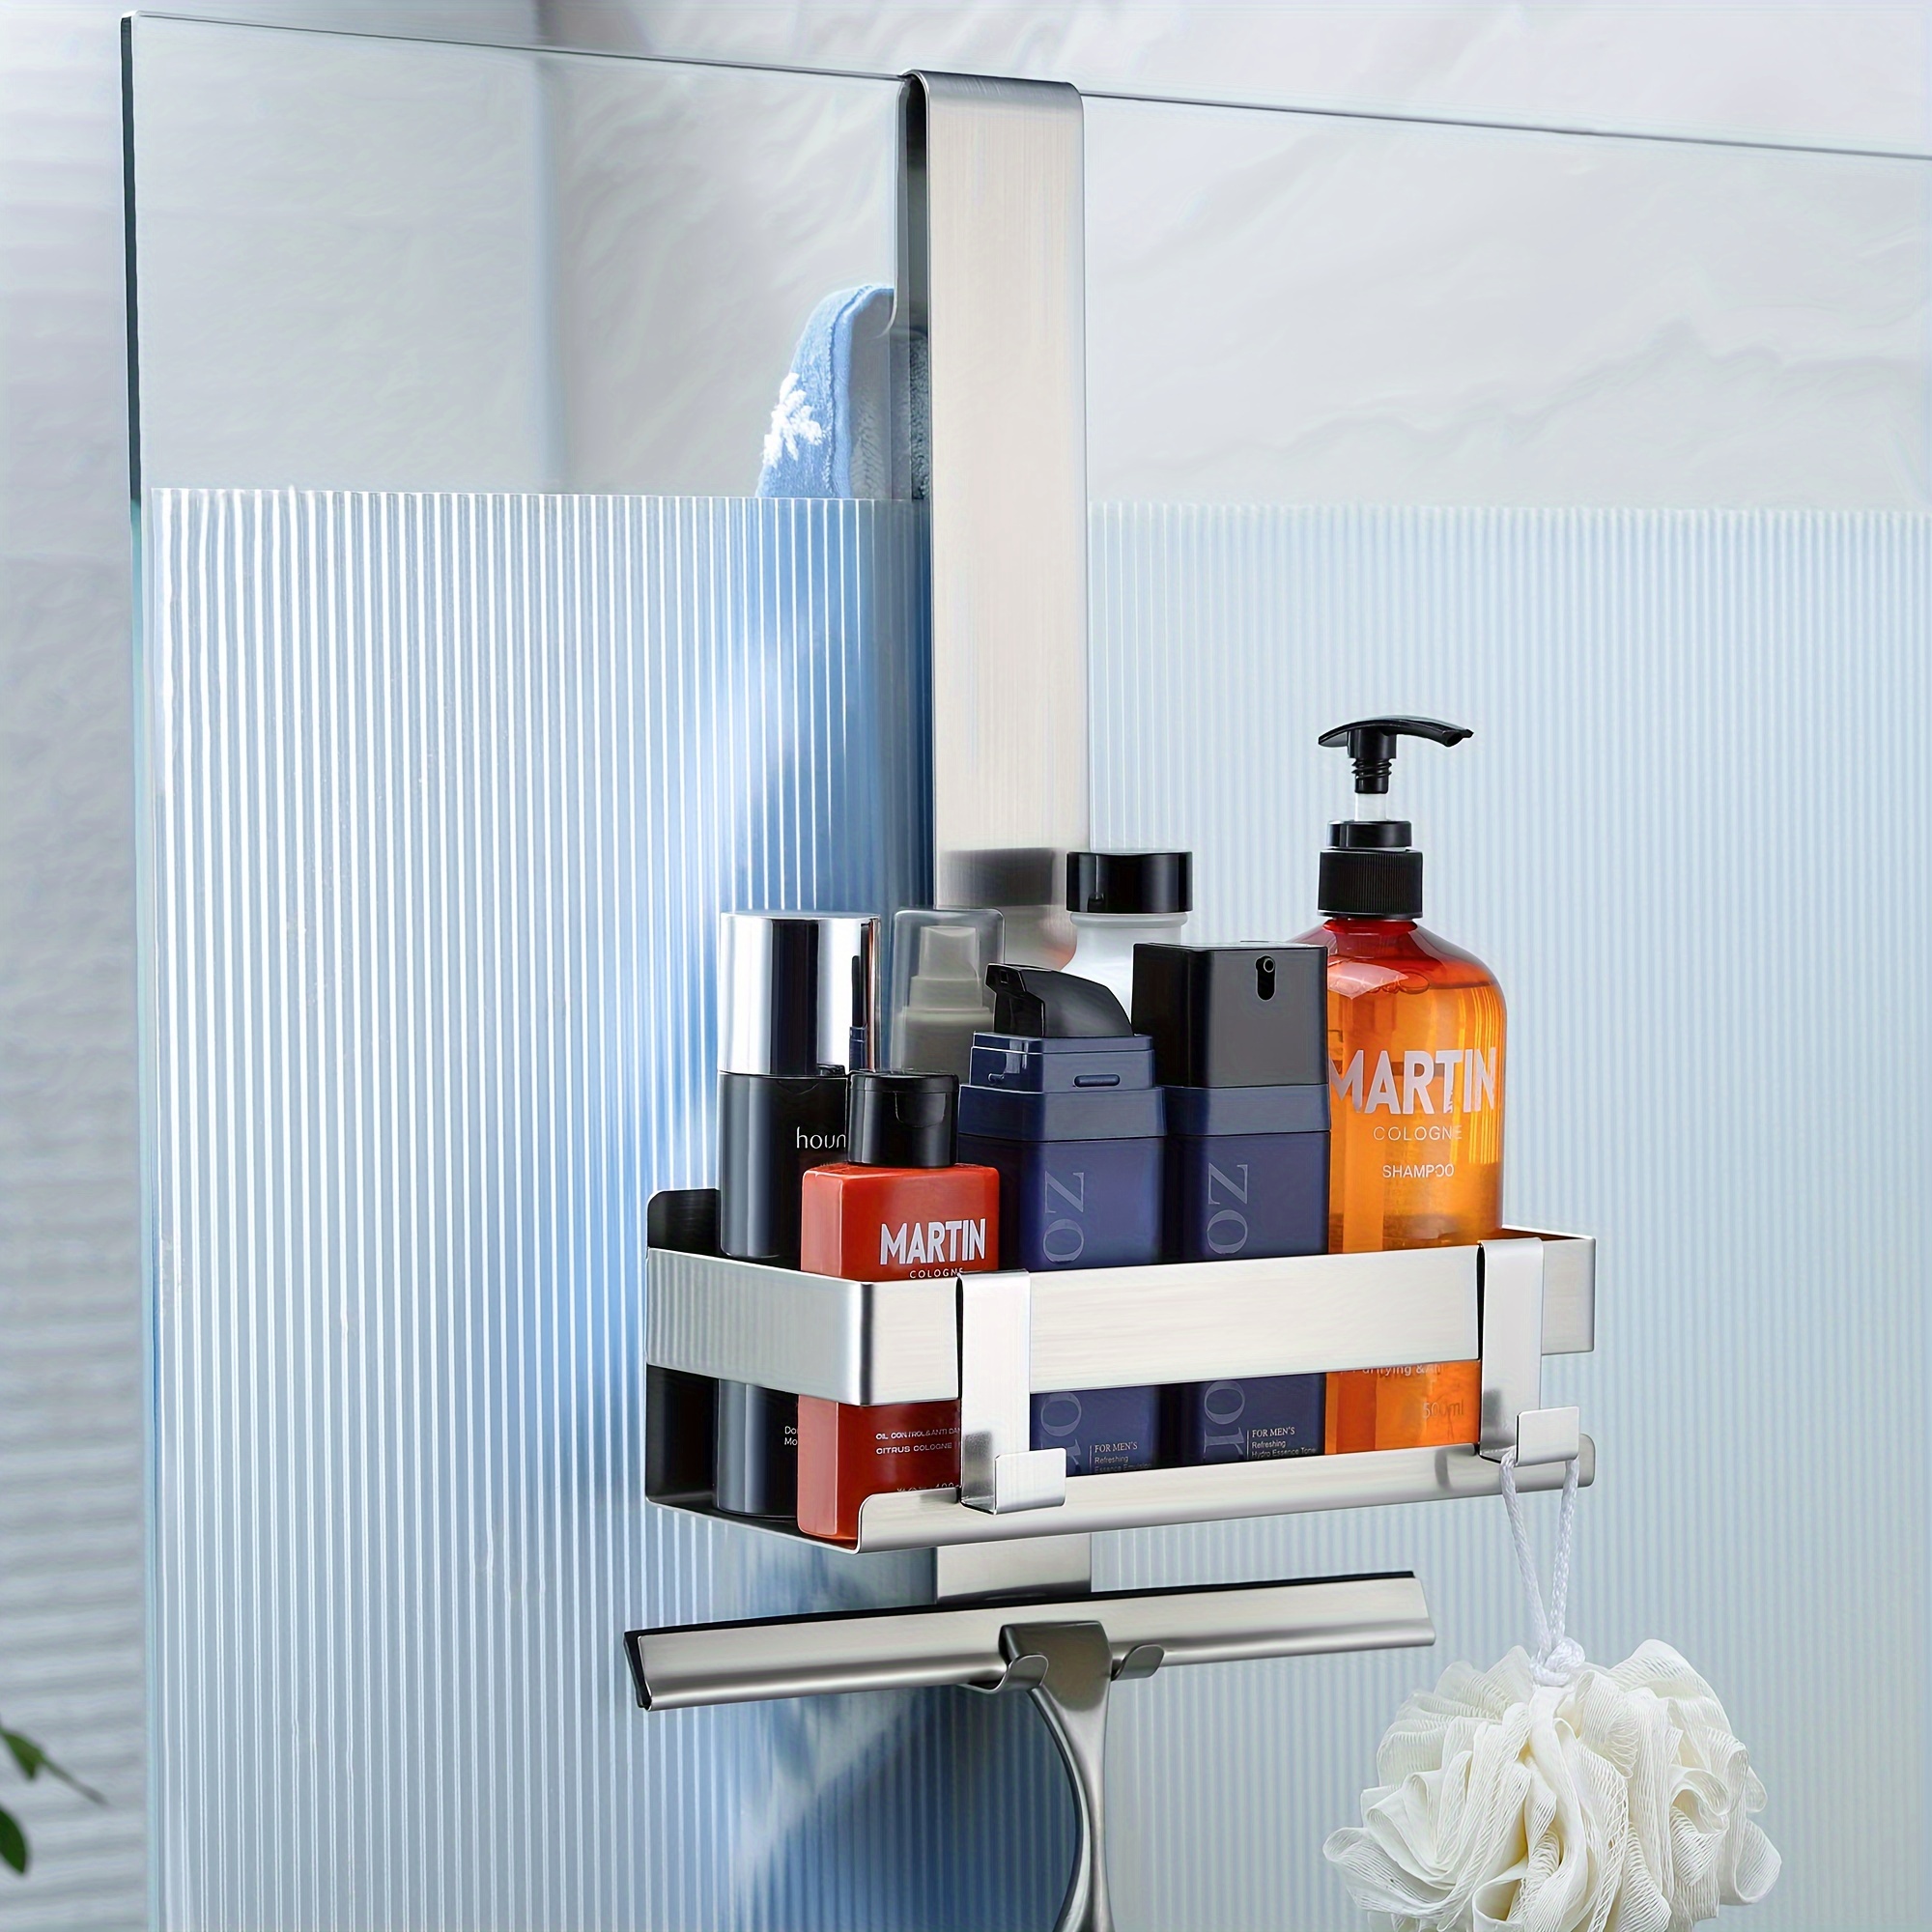 

Stainless Steel Shower Caddy With Hooks - No-drill, Rust-resistant Bathroom Organizer For Shampoo & Soap